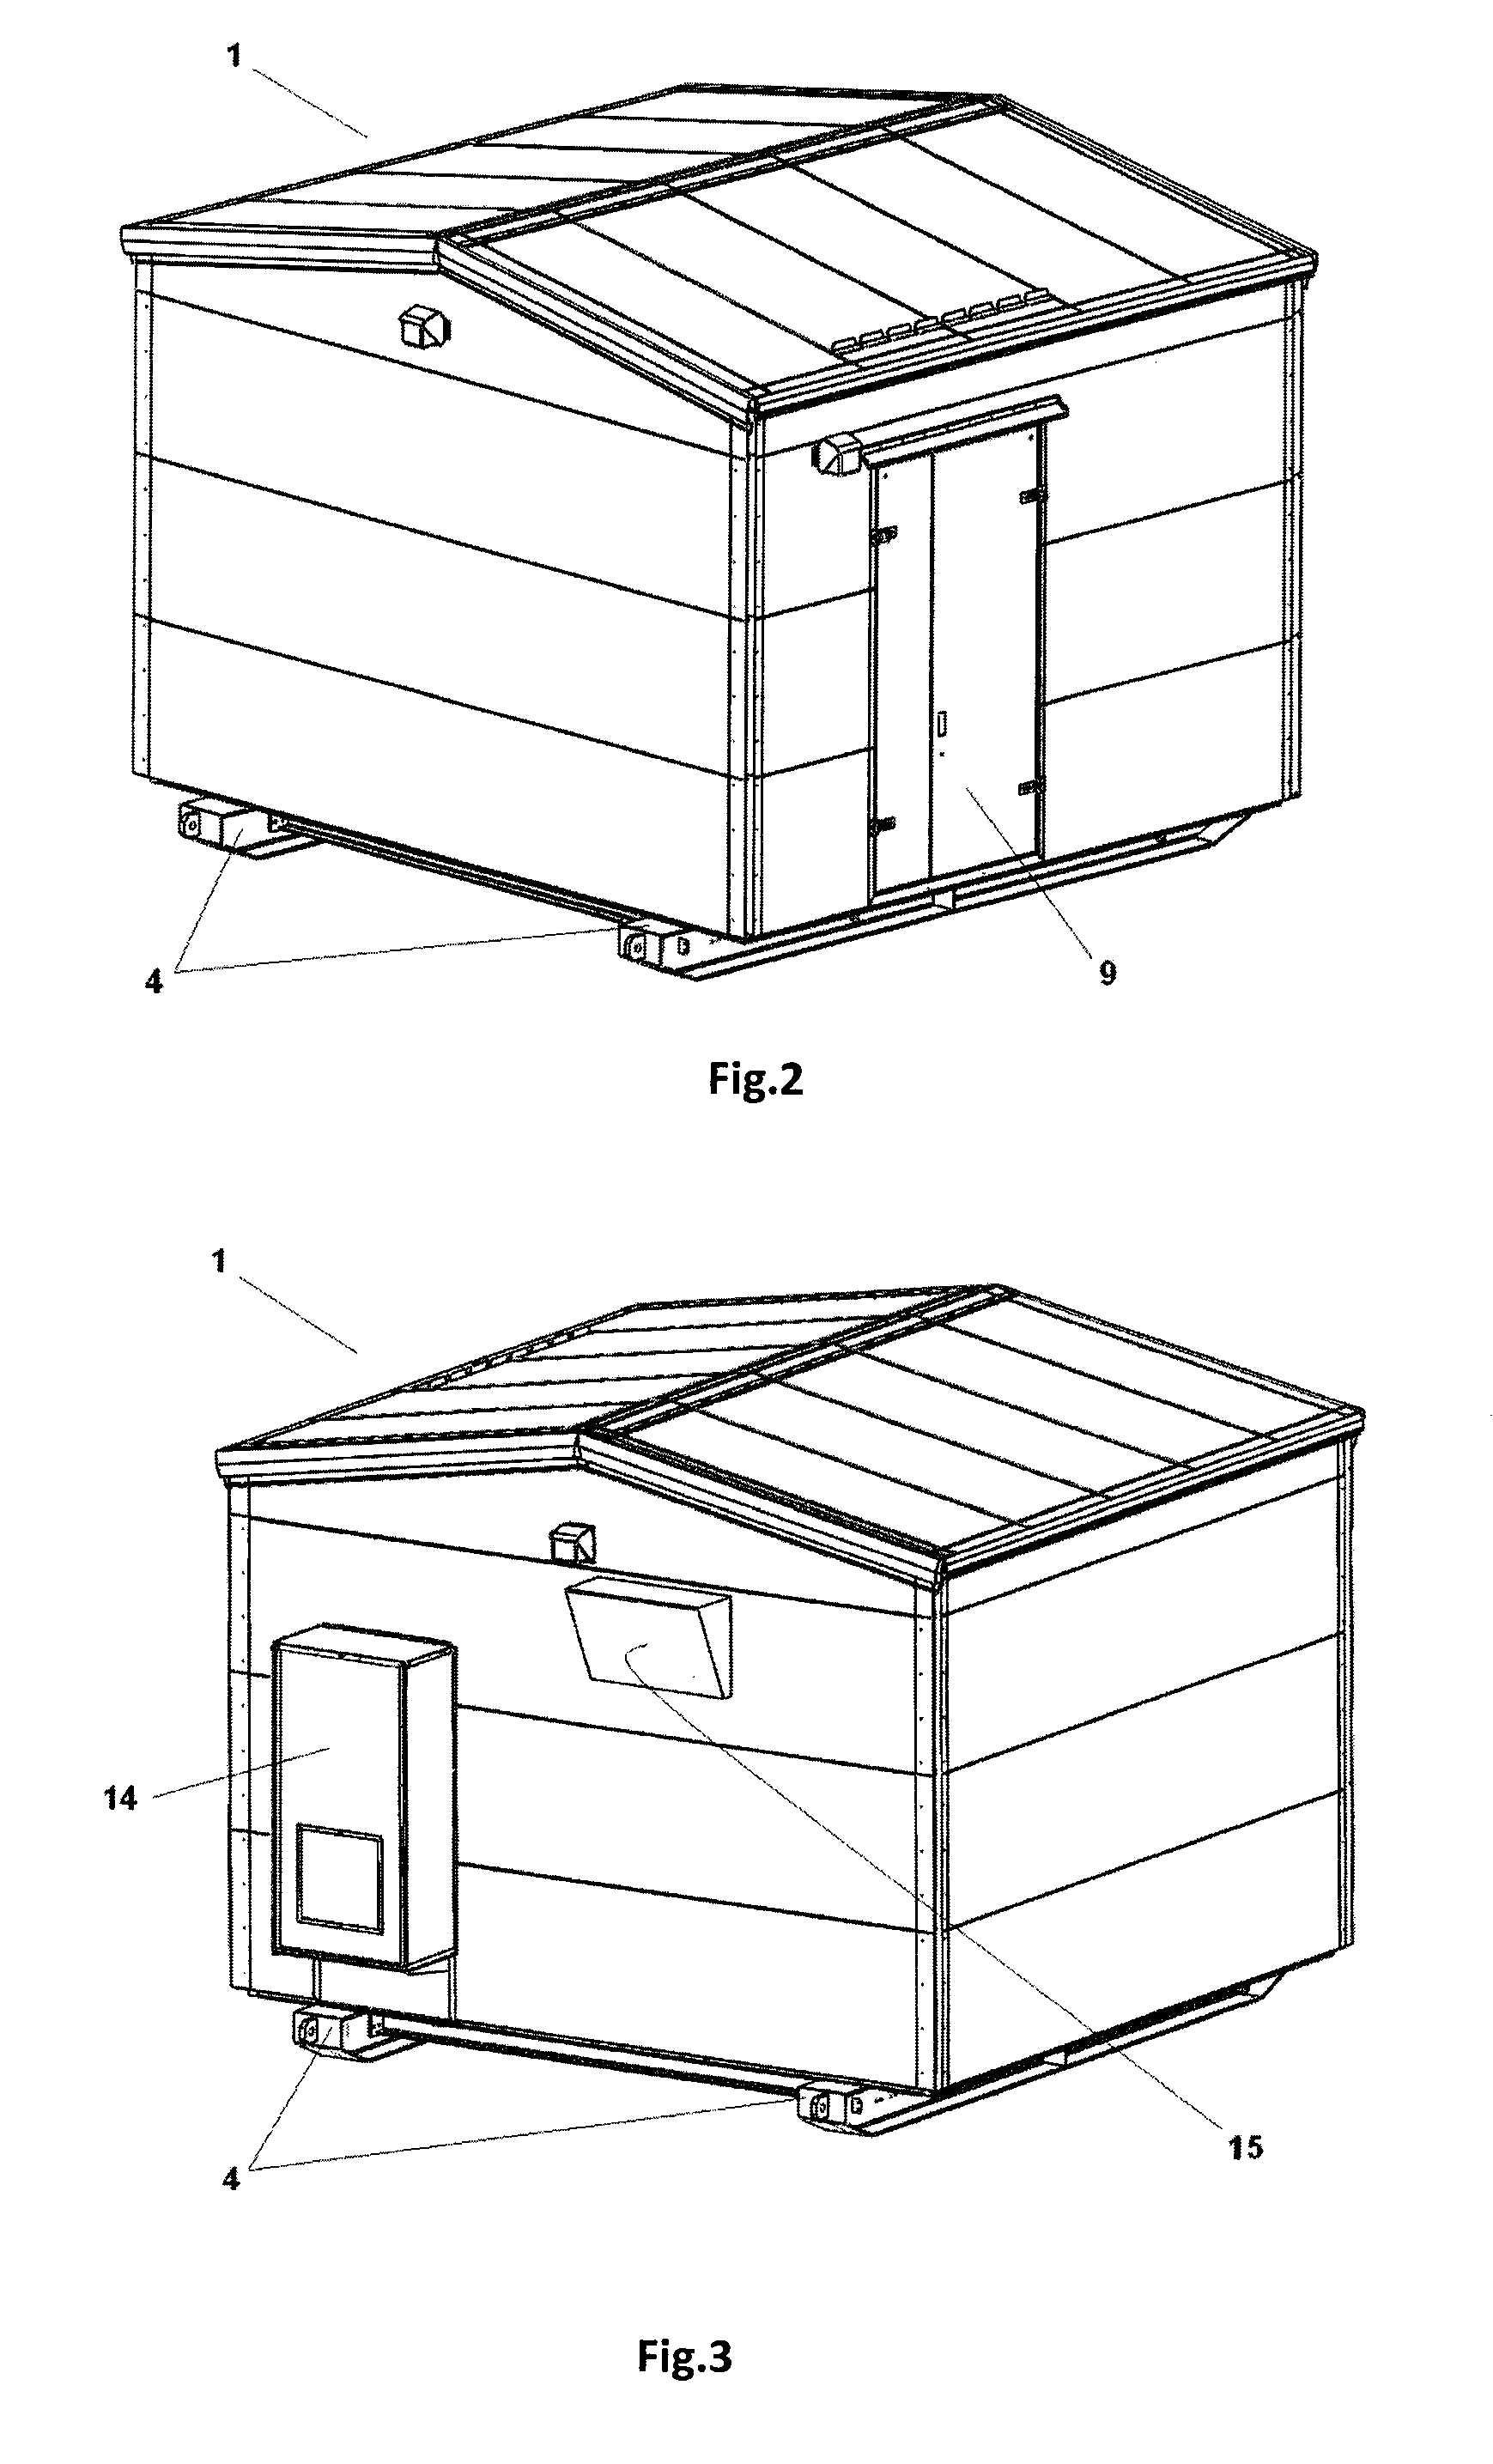 Enclosure for secondary distribution modular switchgears